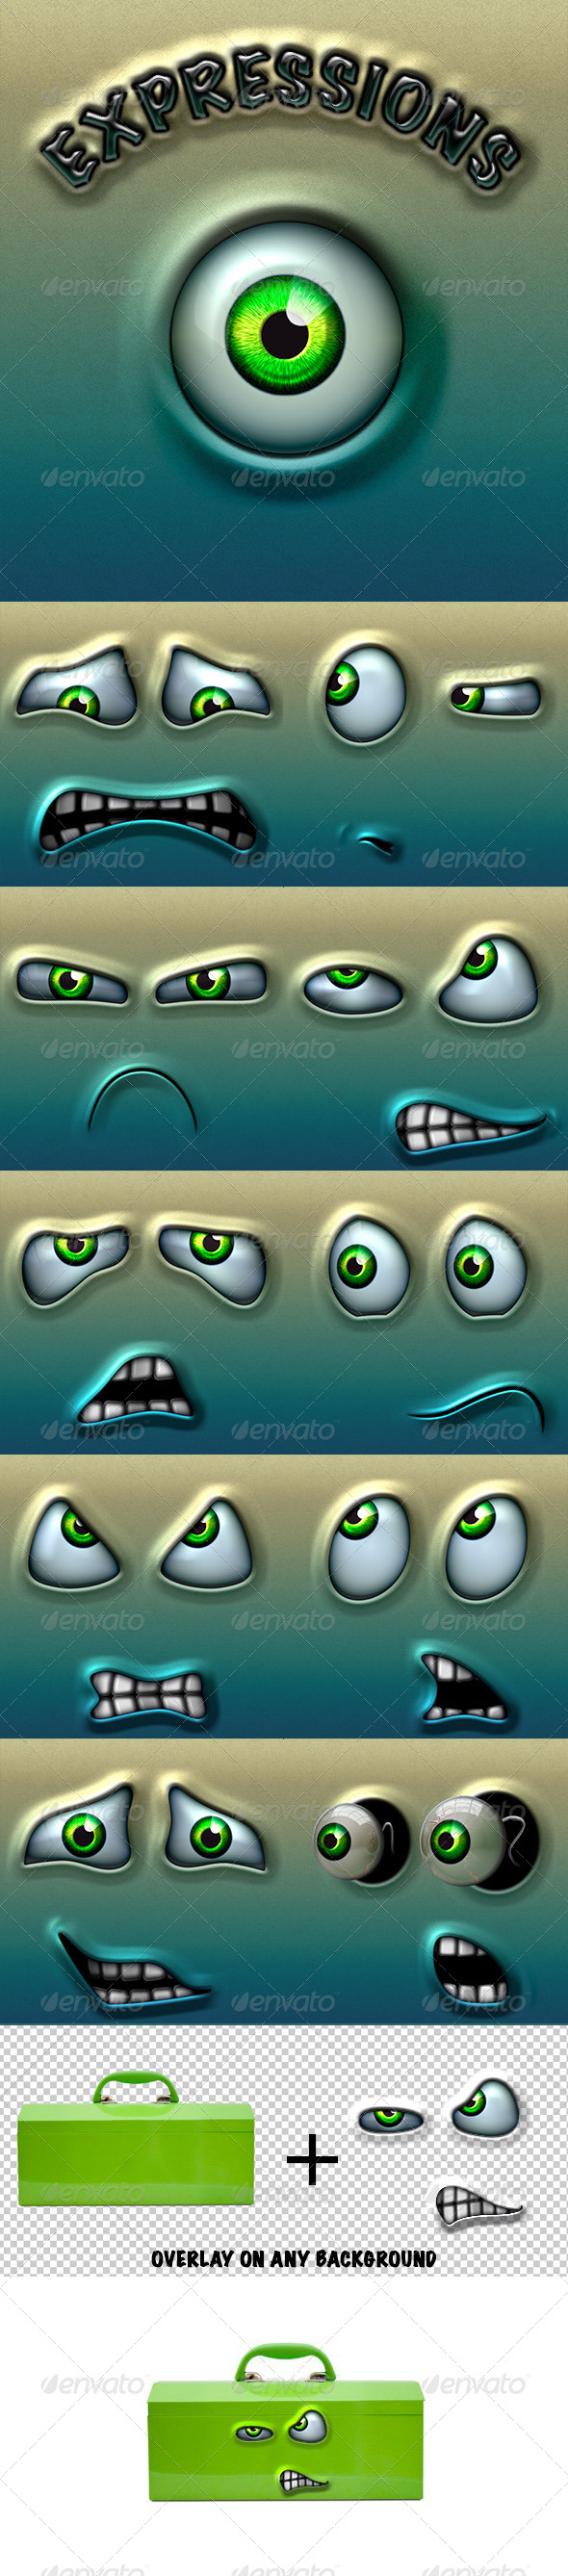 Character Expressions Pack 3